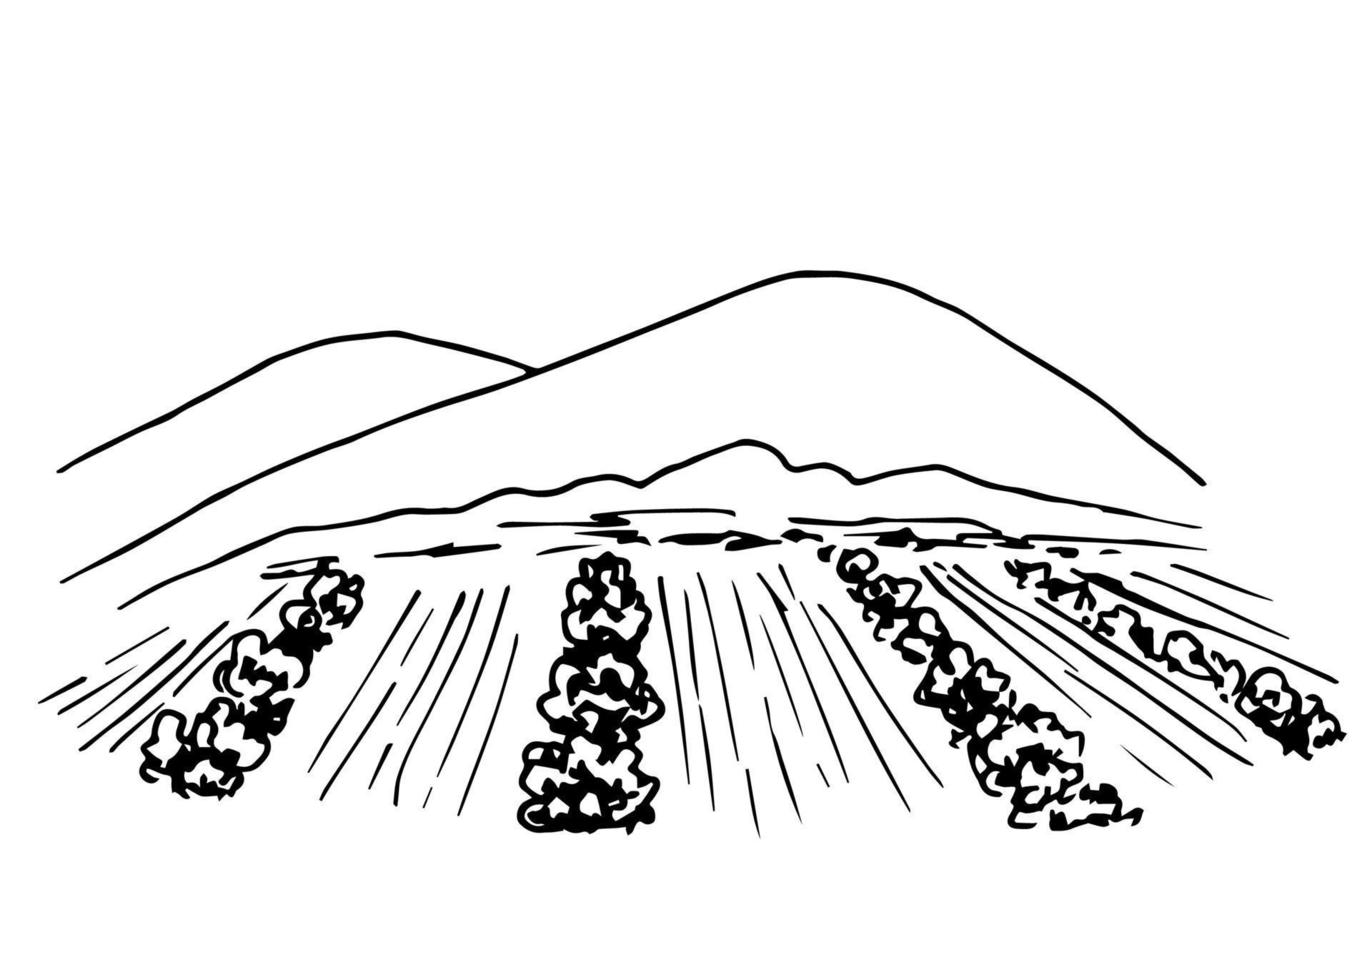 Ink simple vector sketch. Vineyard landscape, rows of grape bushes, garden tree perspective, mountains on the horizon. Engraving style, print label, wine list, menu, countryside. Plant cultivation.